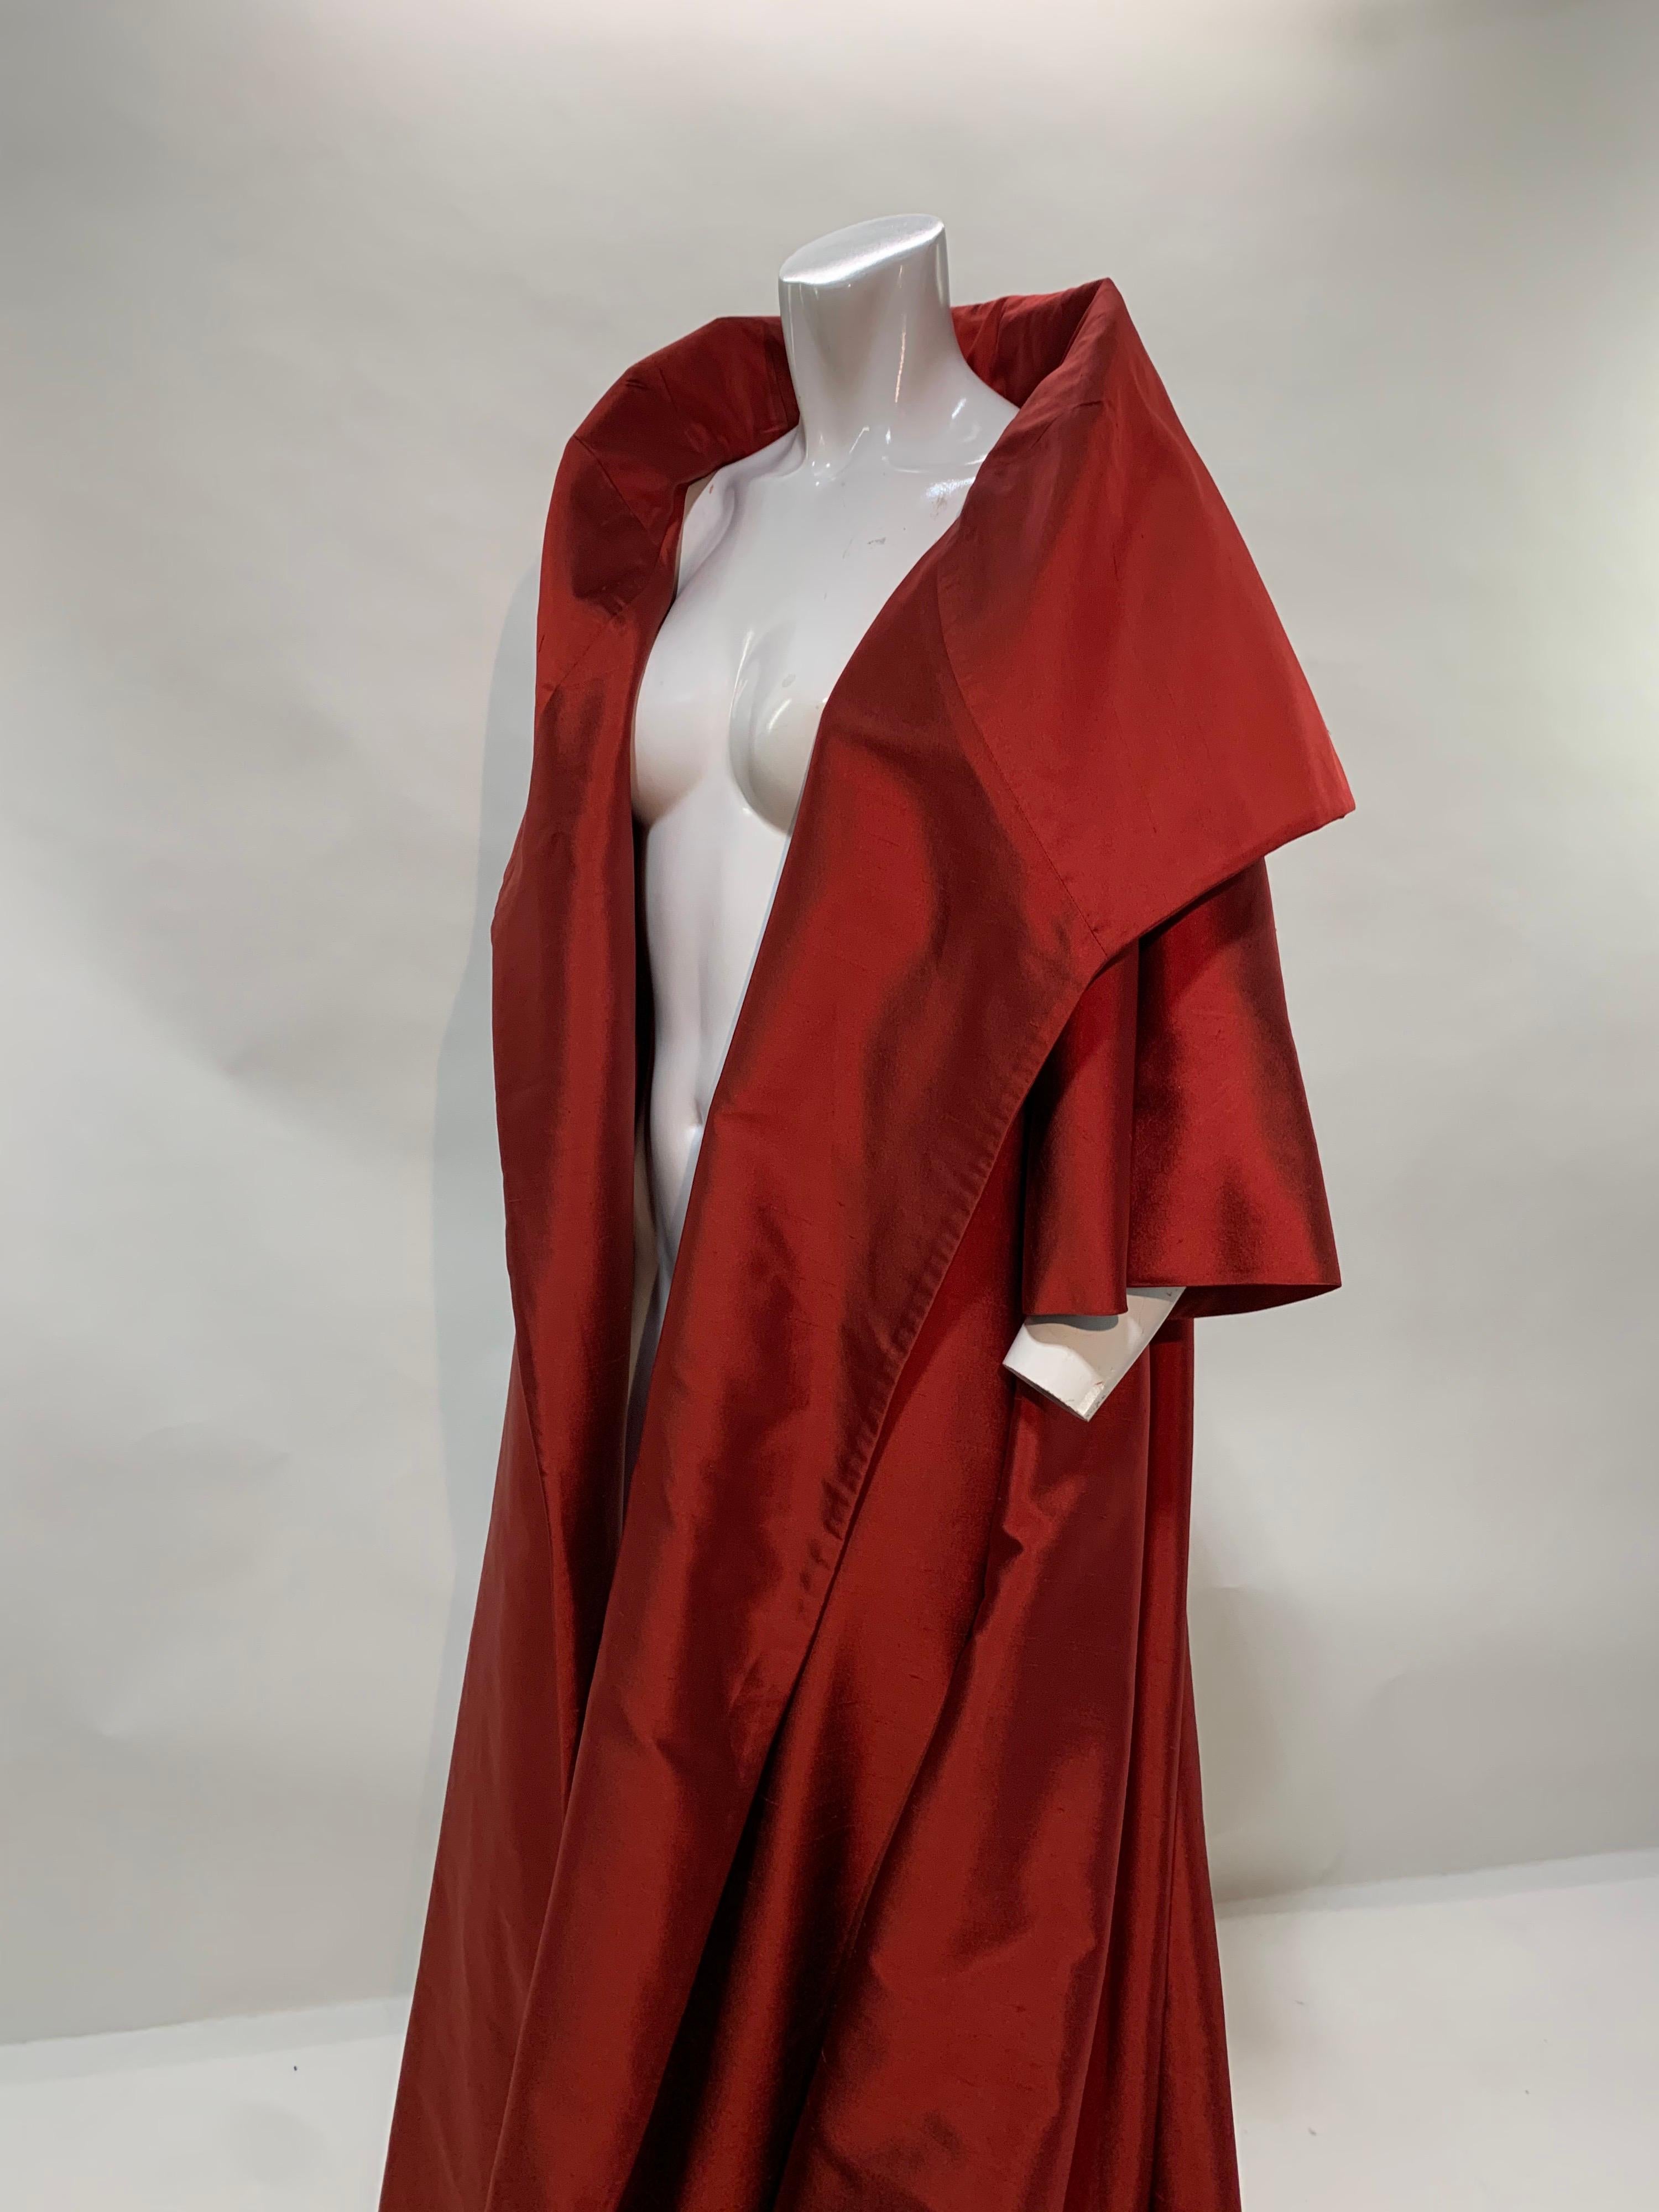 A fabulous Christian Dior by Gianfranco Ferre voluminous red changeant silk taffeta opera coat with dramatic shawl collar and train. An elegant double layered design is finished inside and out with additional stays in collar for structure. From the